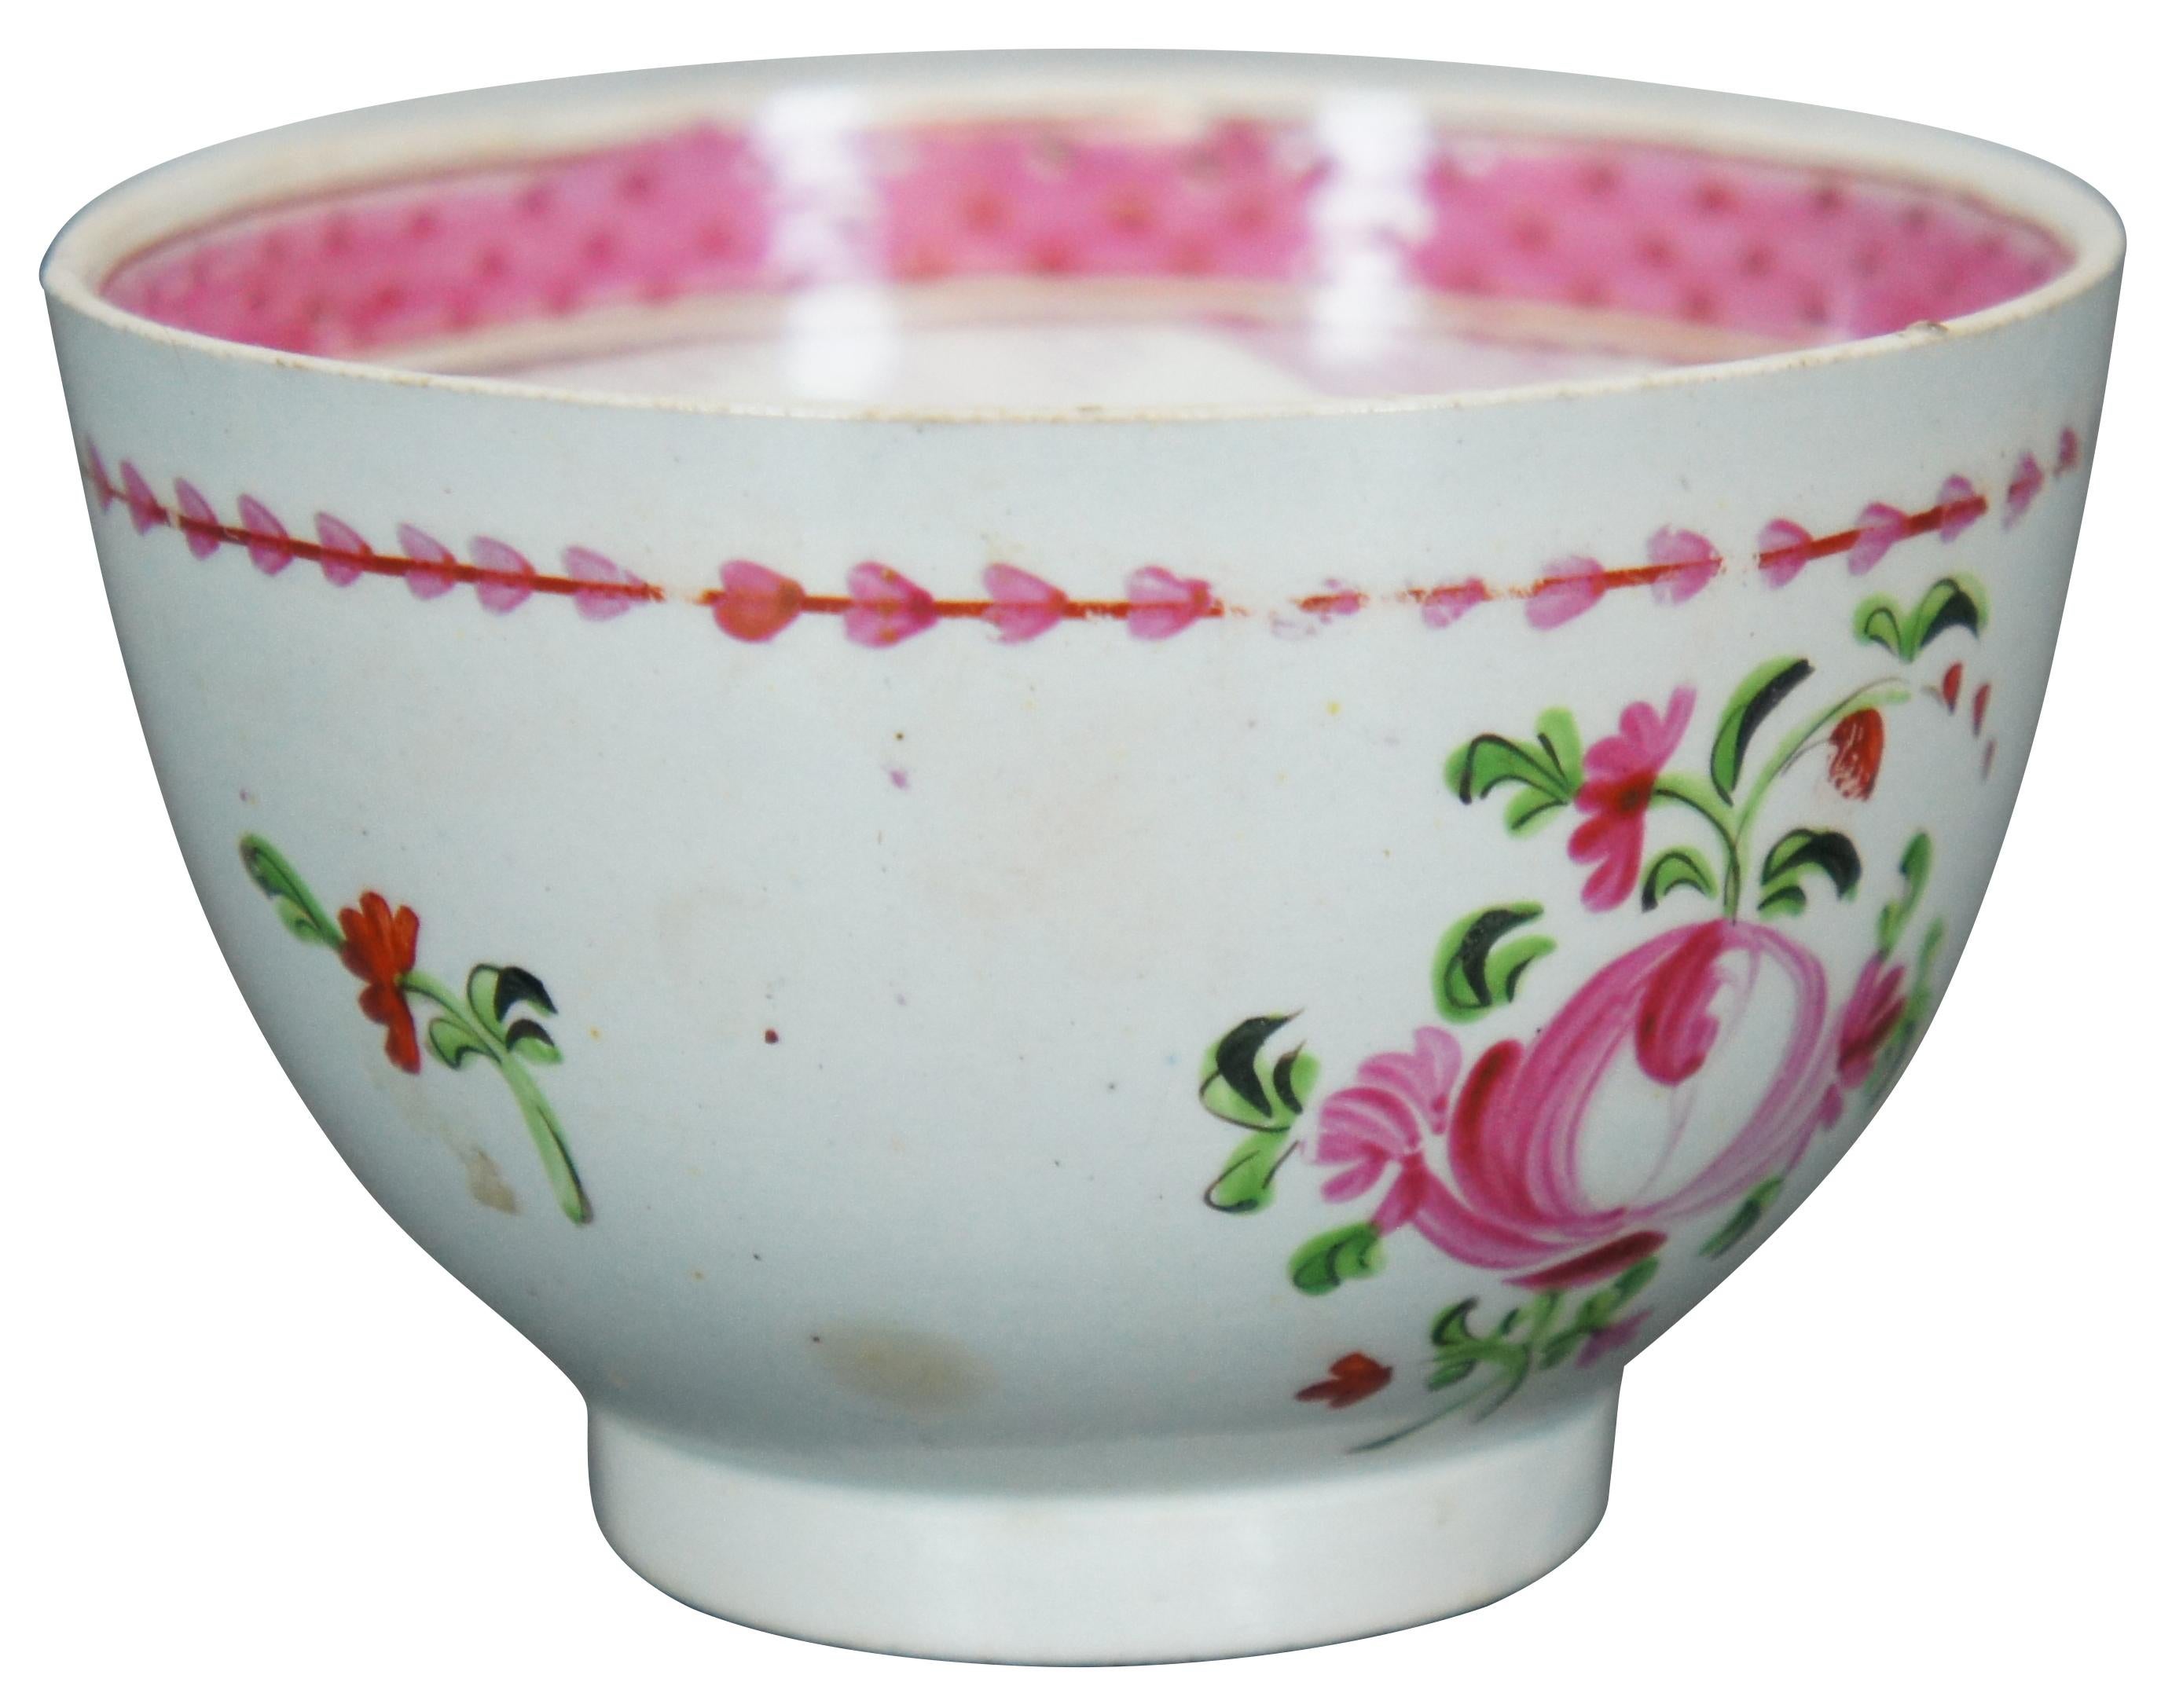 Antique chinese export handle-less tea cup from the Qianlong period (circa late 1700’s) featuring pink lattice and famille rose pattern.